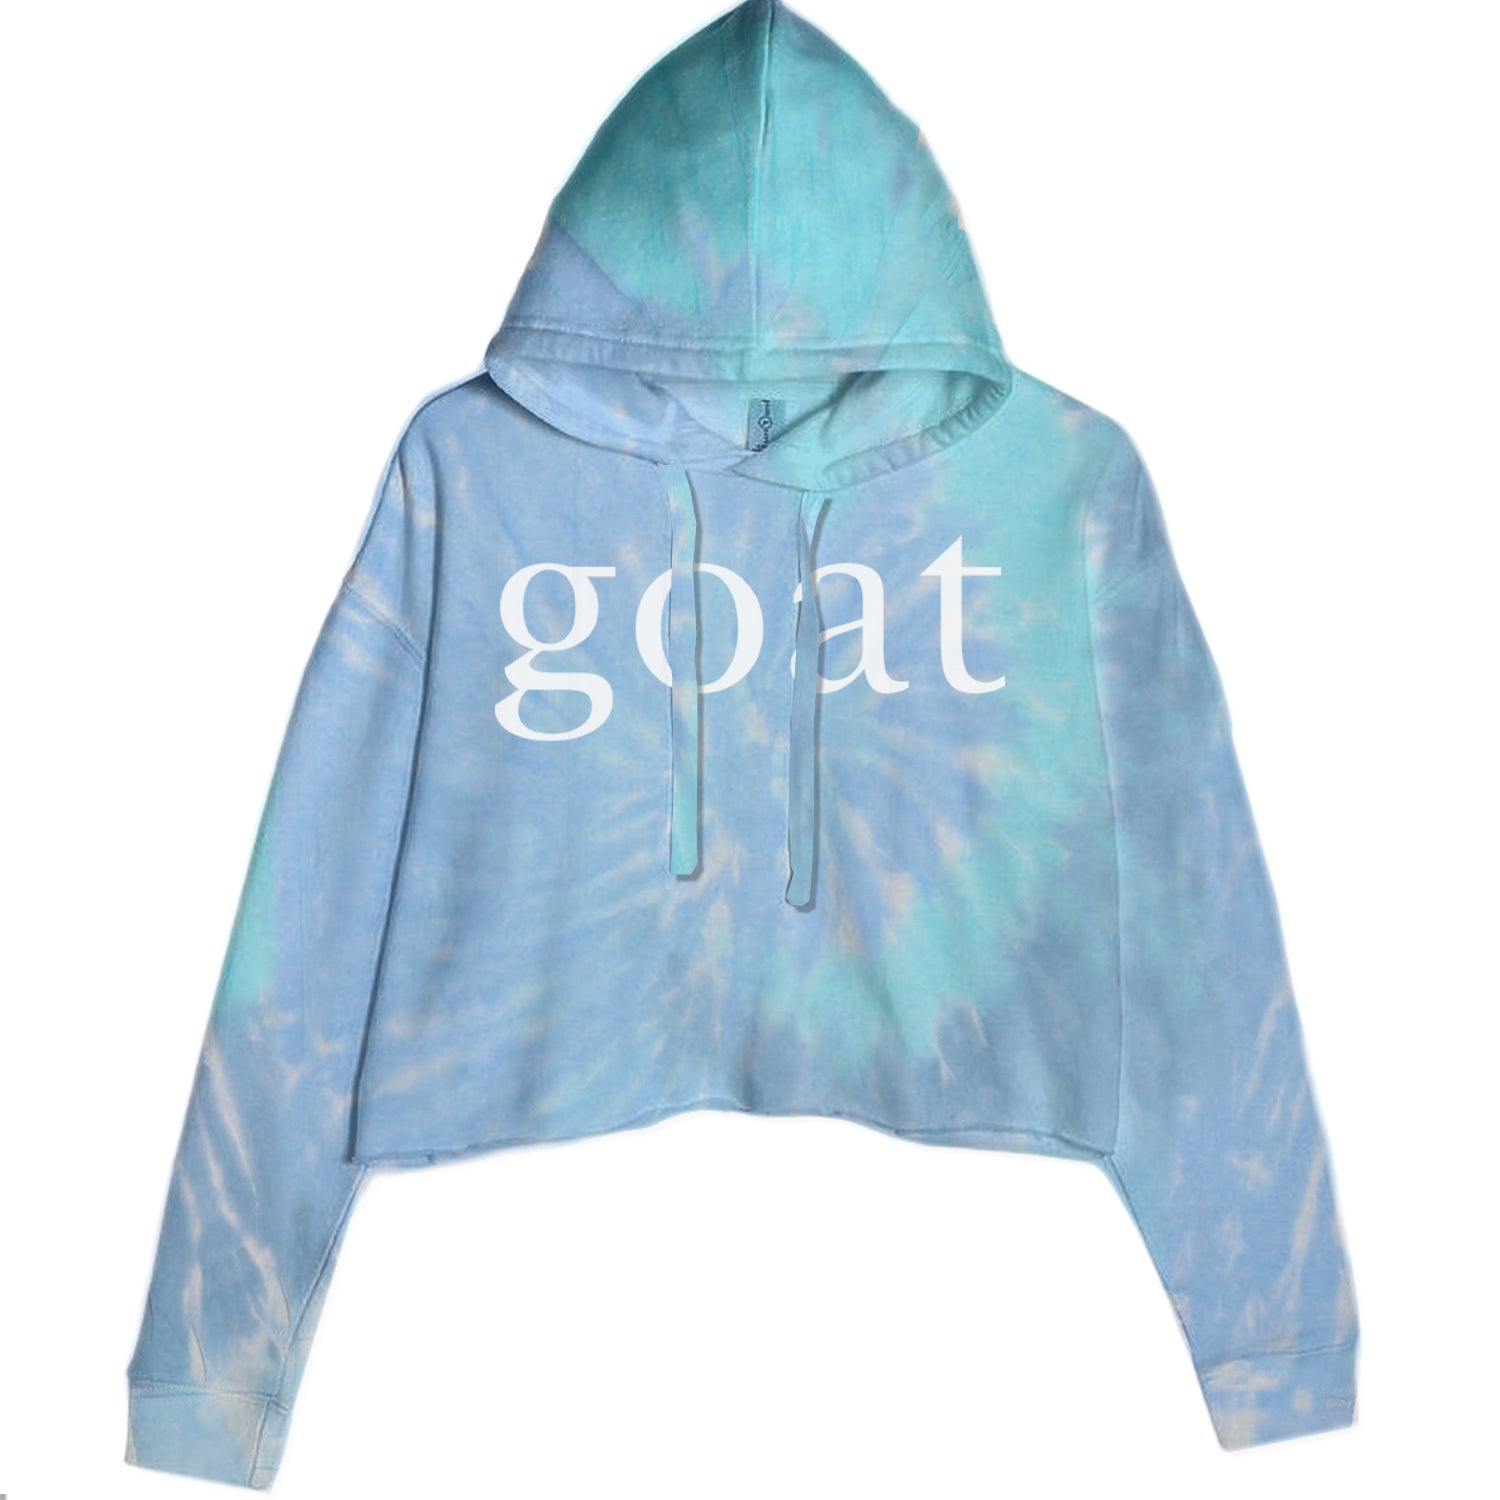 GOAT - Greatest Of All Time  Cropped Hoodie Sweatshirt Blue Clouds